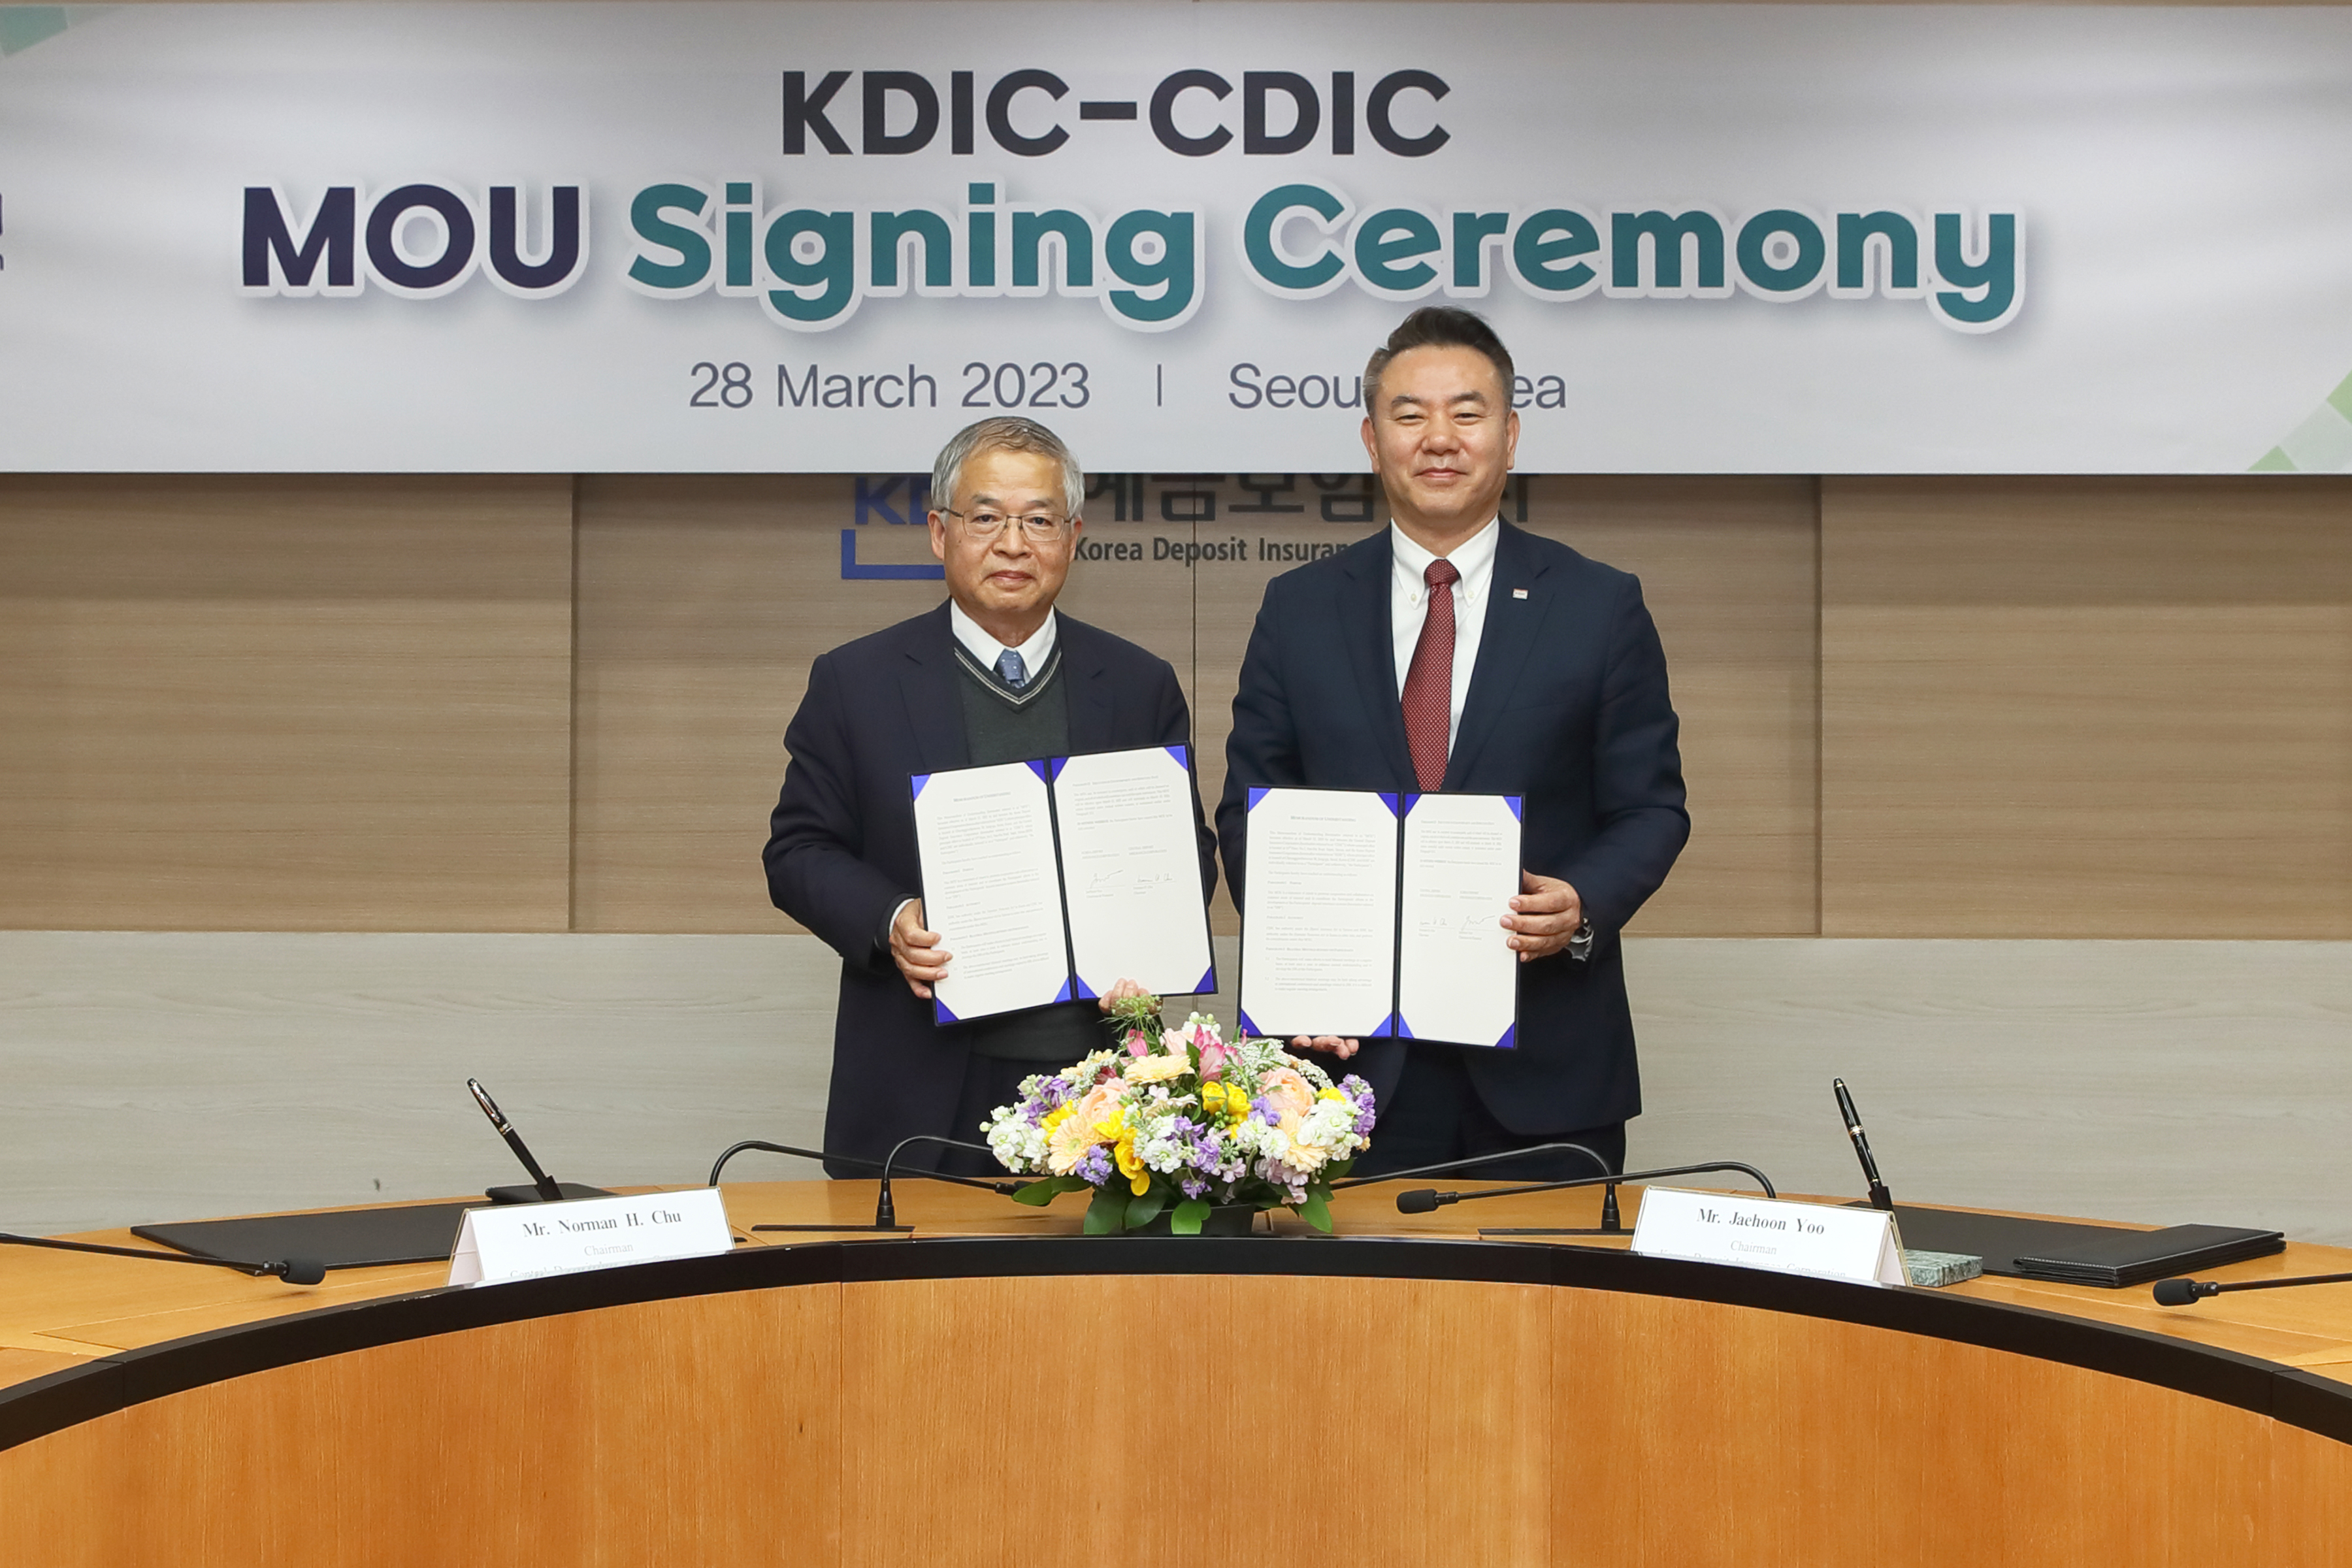  CDIC Chairman Chu （left） and KDIC Chairman Yoo （right） represented the respective organizations to sign the renewed MOU on March 28, 2023